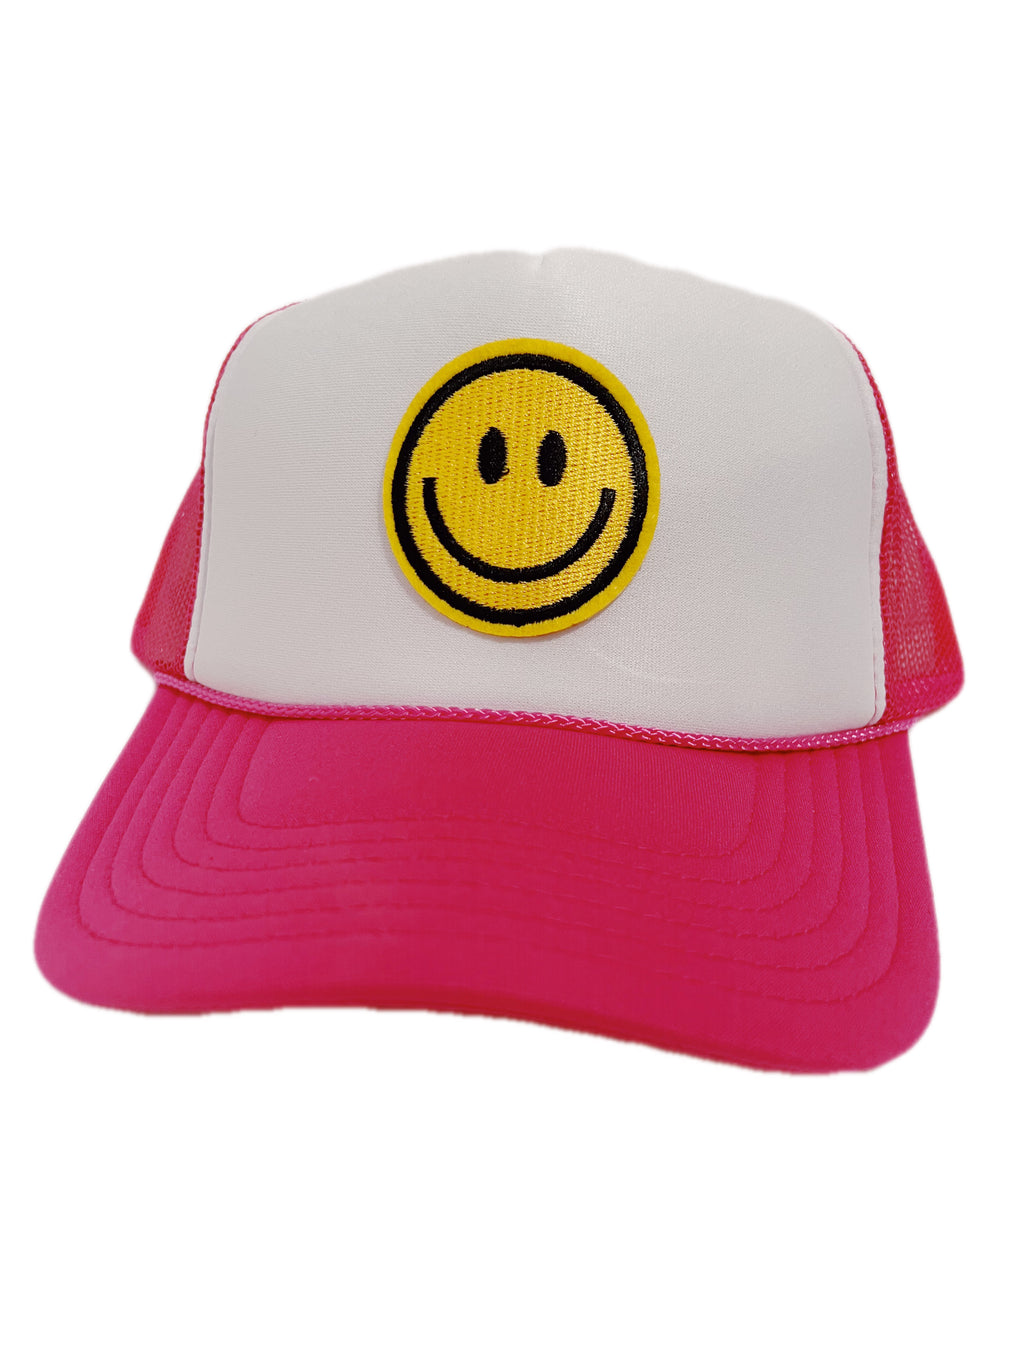 HOT PINK TWO TONED SMILEY HAT ☻